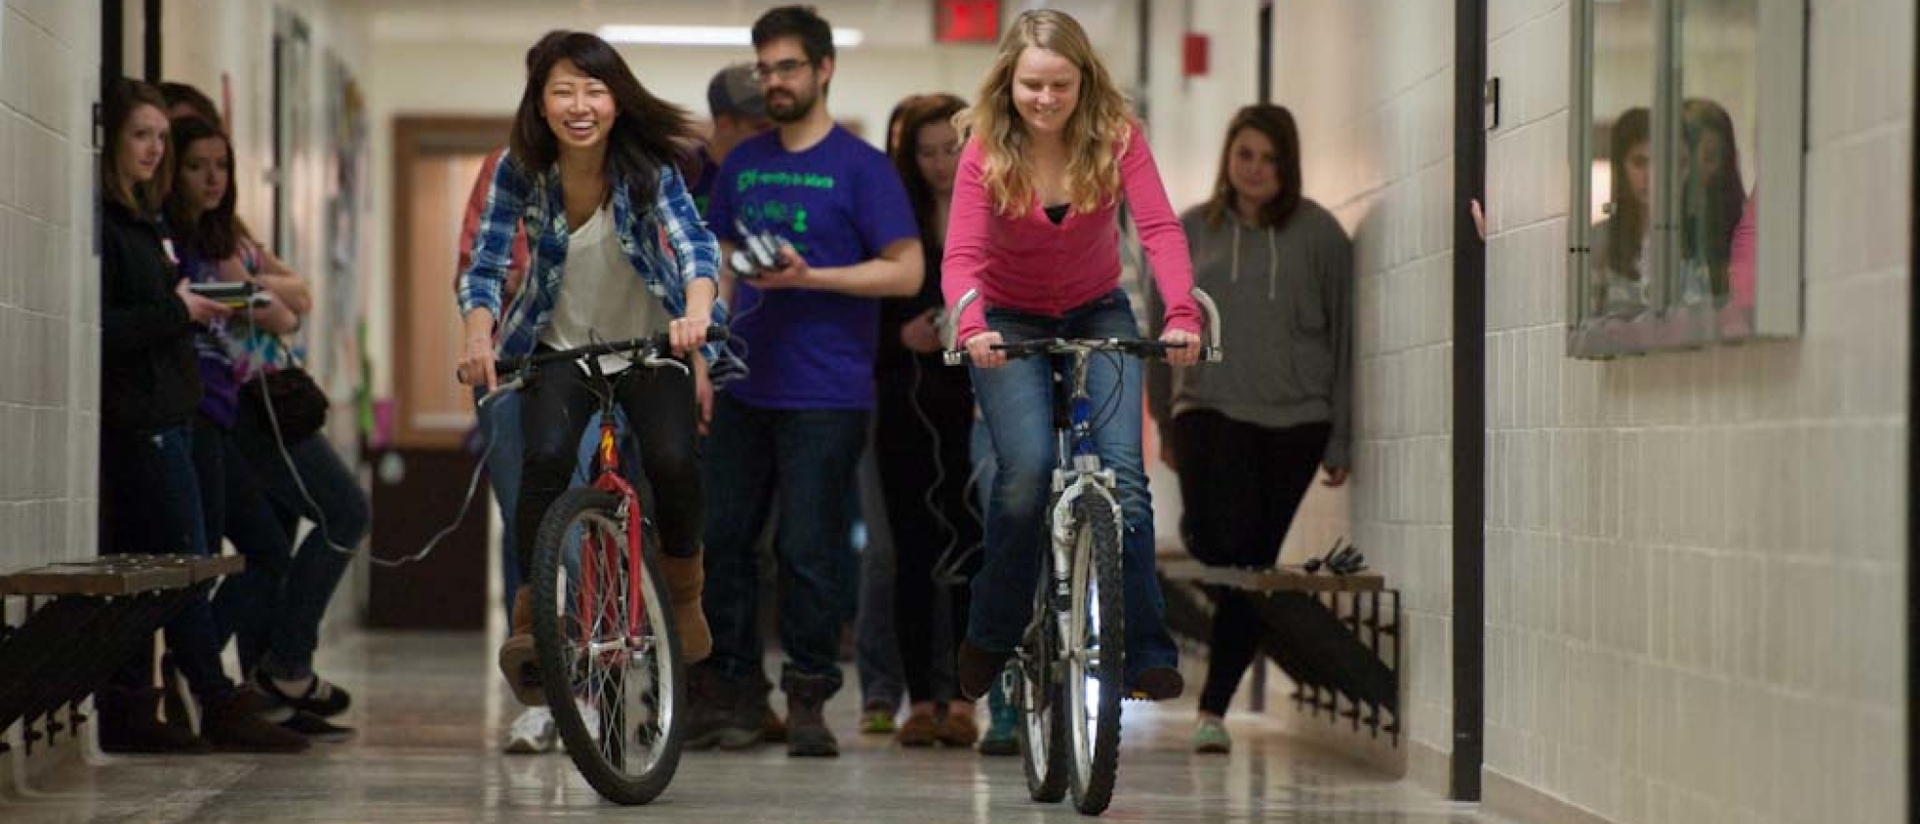 Students riding on bikes for math day